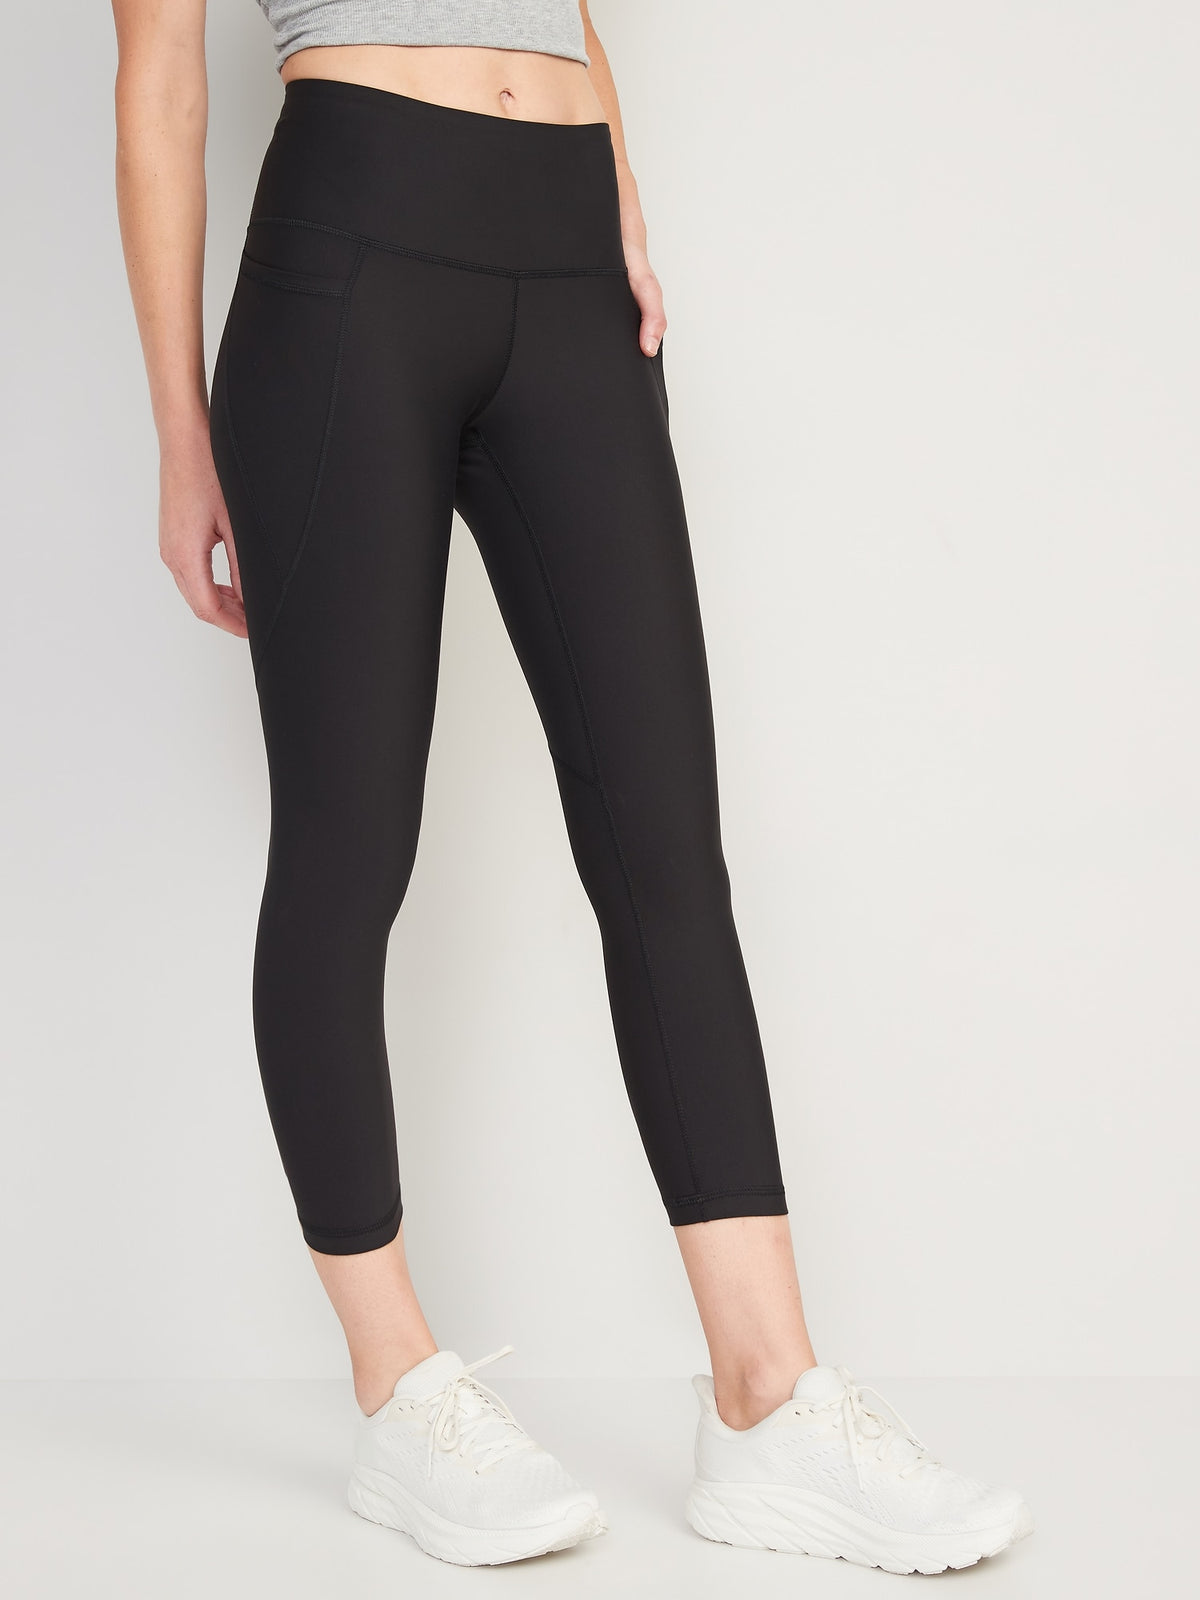 High-Waisted PowerSoft Side-Pocket Crop Leggings for Women - Old